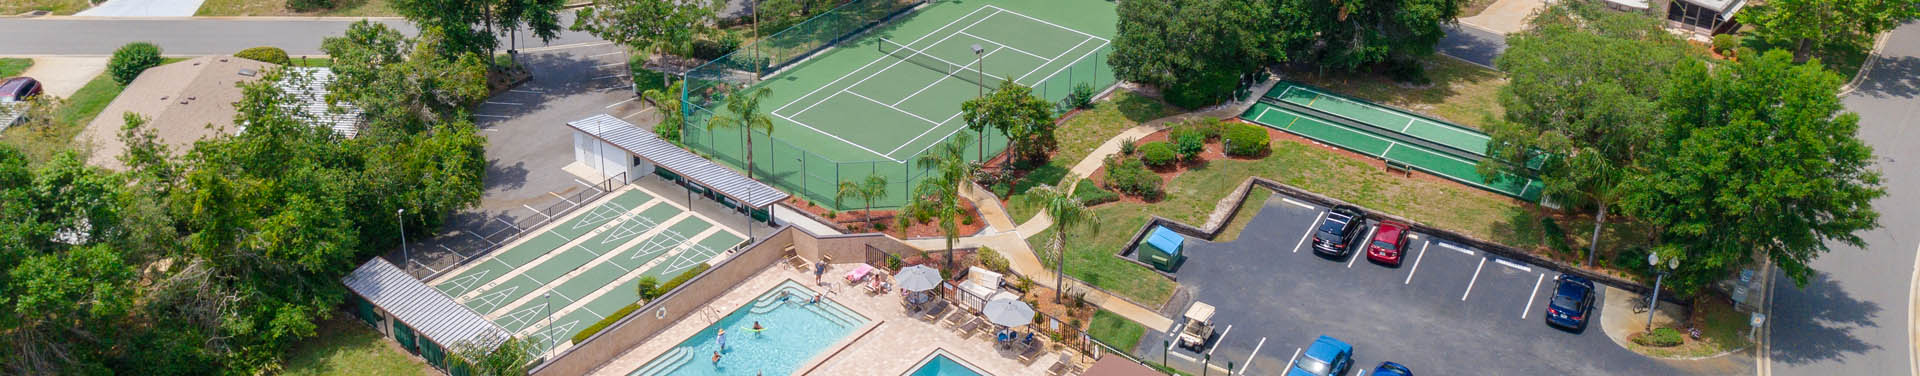 Photo of tennis court, pools, parking lot, shuffle board courts, and trees taken from a drone in the sky looking down